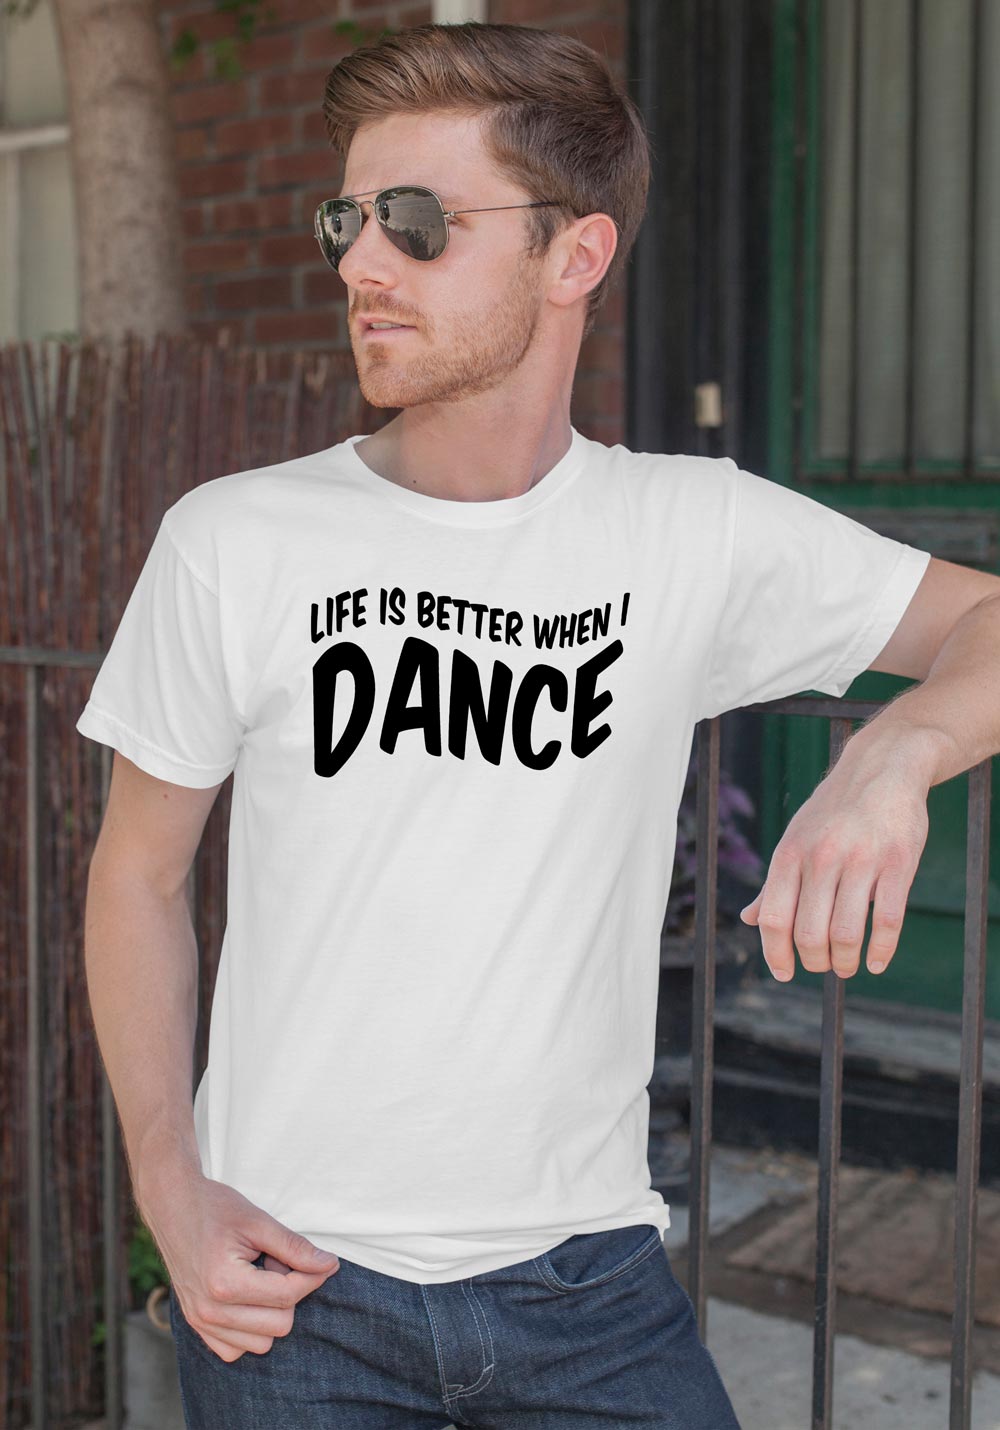 Man wearing Zouk T-shirt decorated with unique “Life is better when I Dance” design in white crew neck style